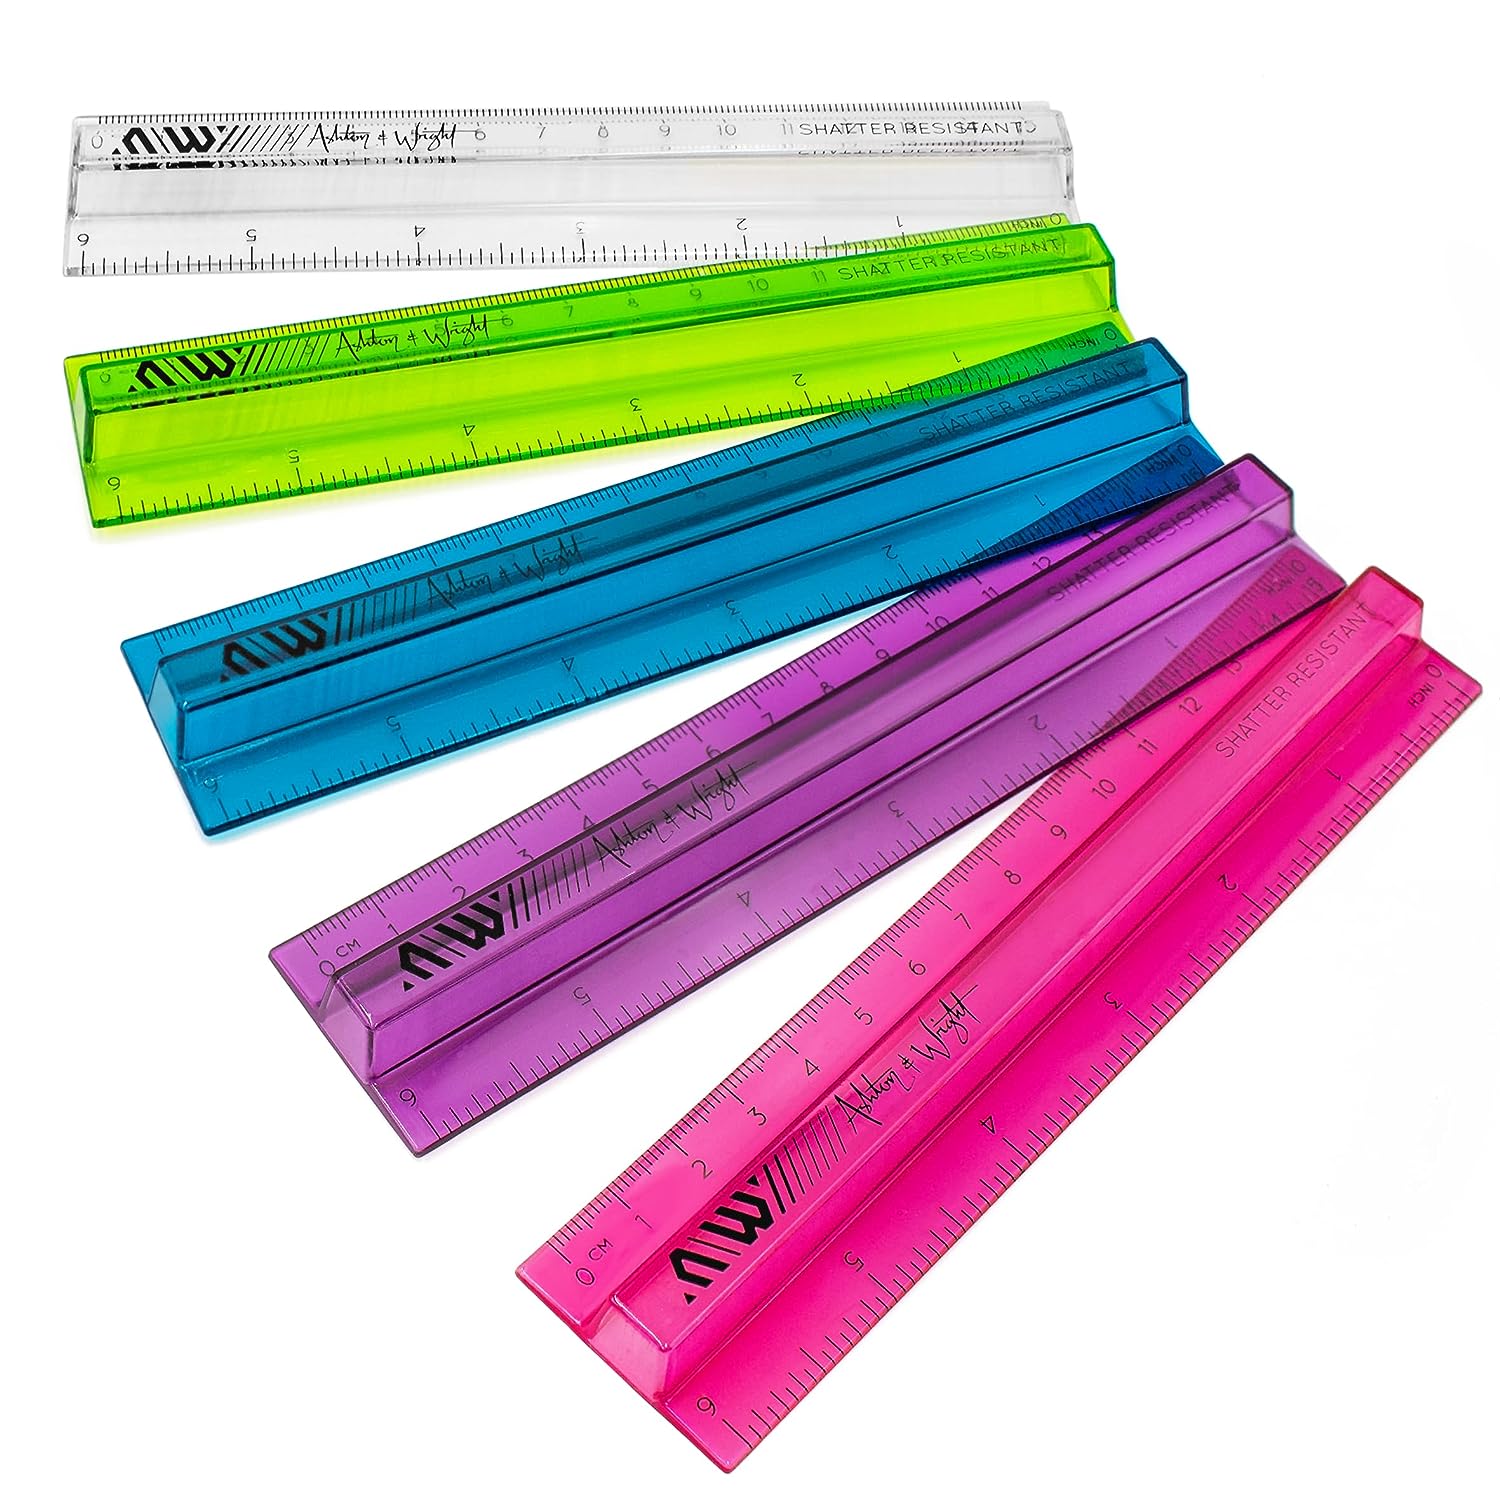 6 Inch / 15cm Rulers Shatter Resistant Pack of 5 Pastel Colours